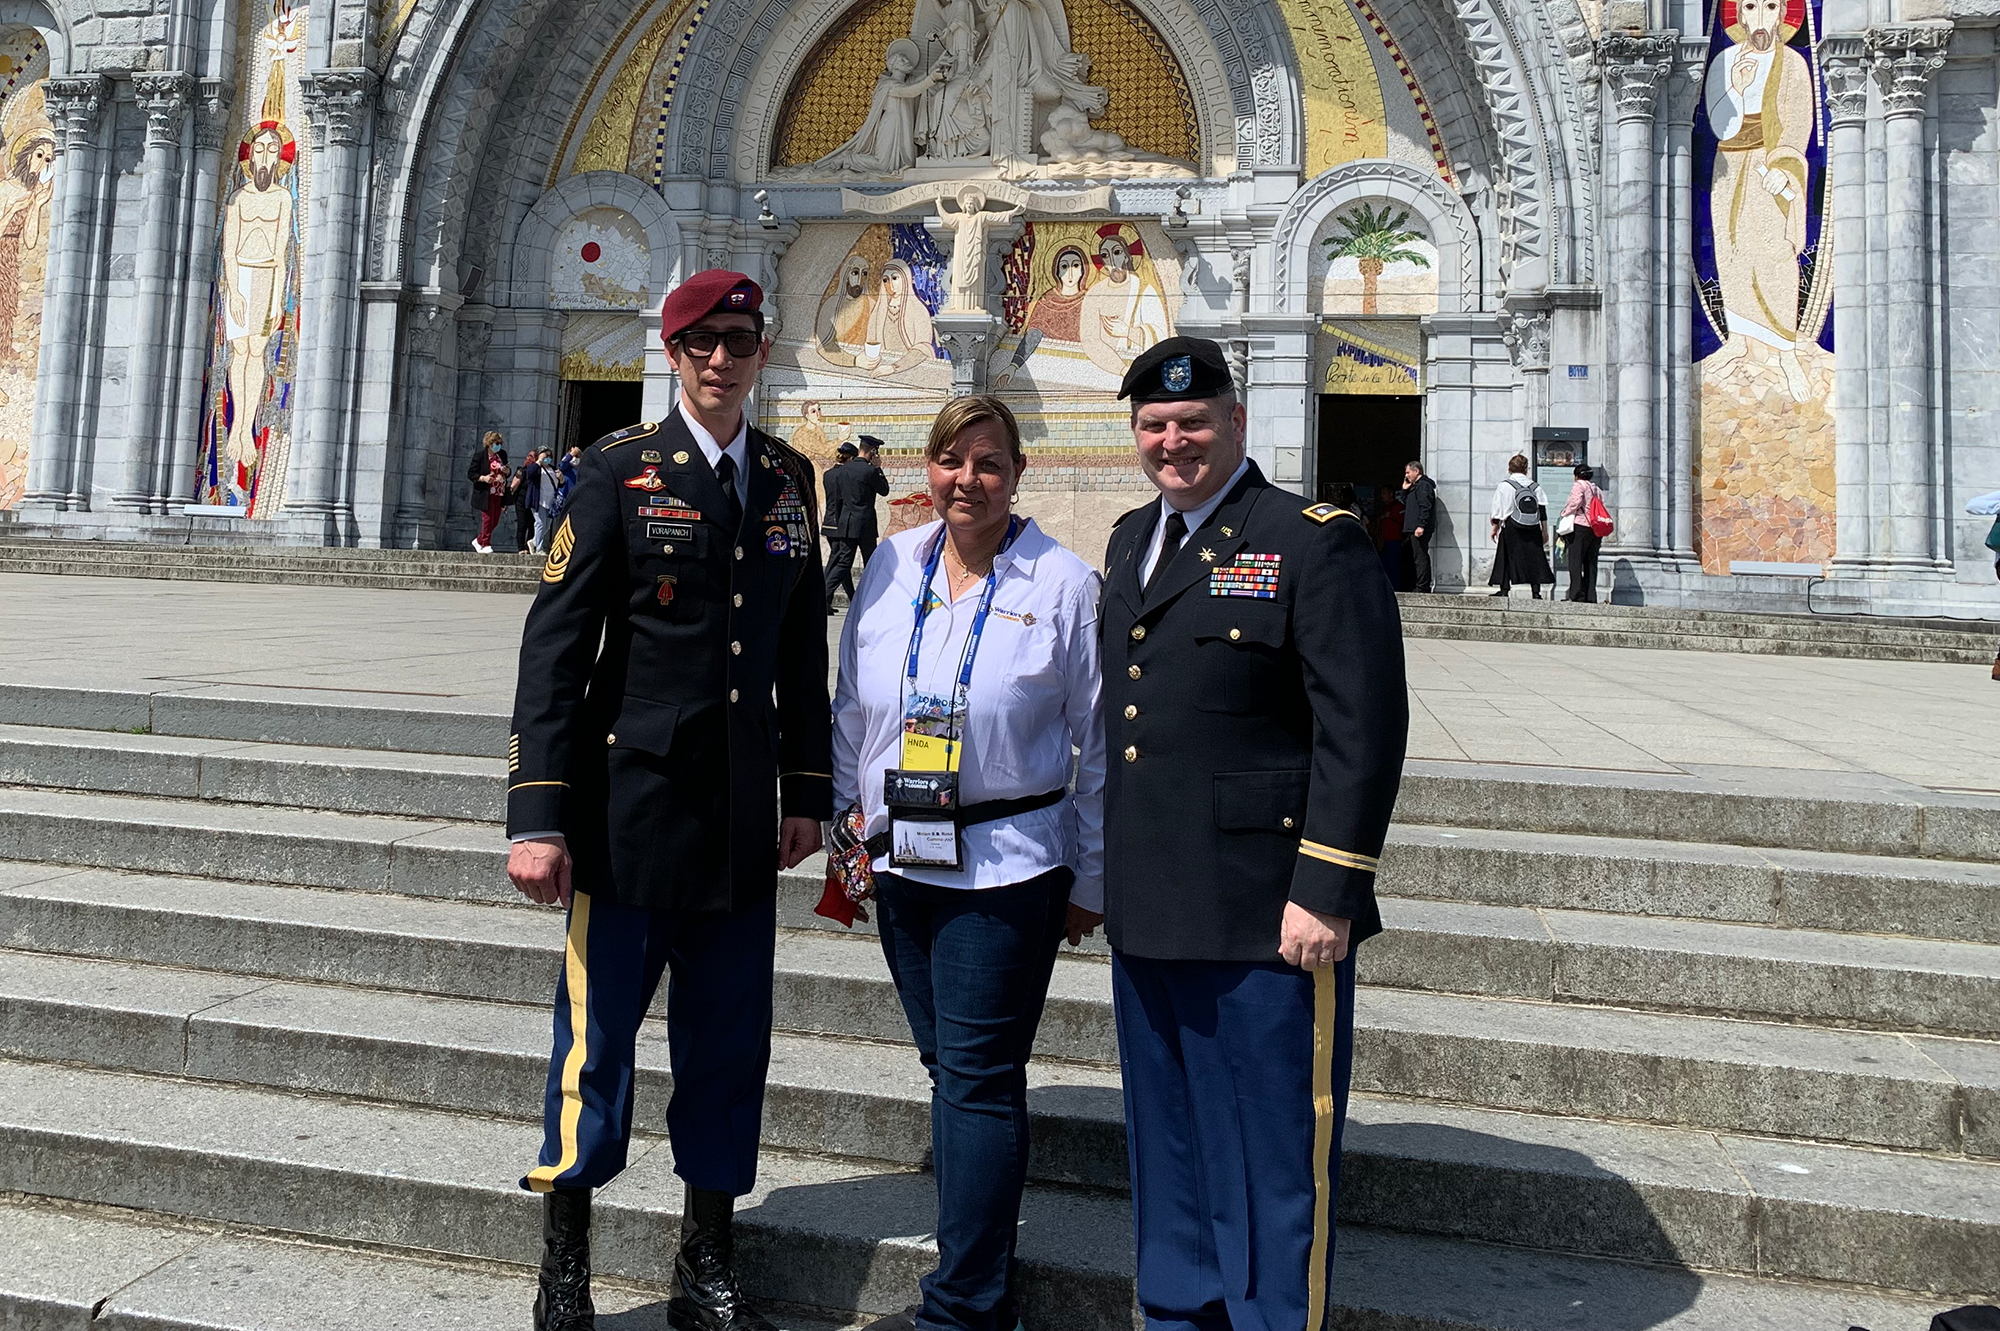 Theology veterans connect in Lourdes with help of professor